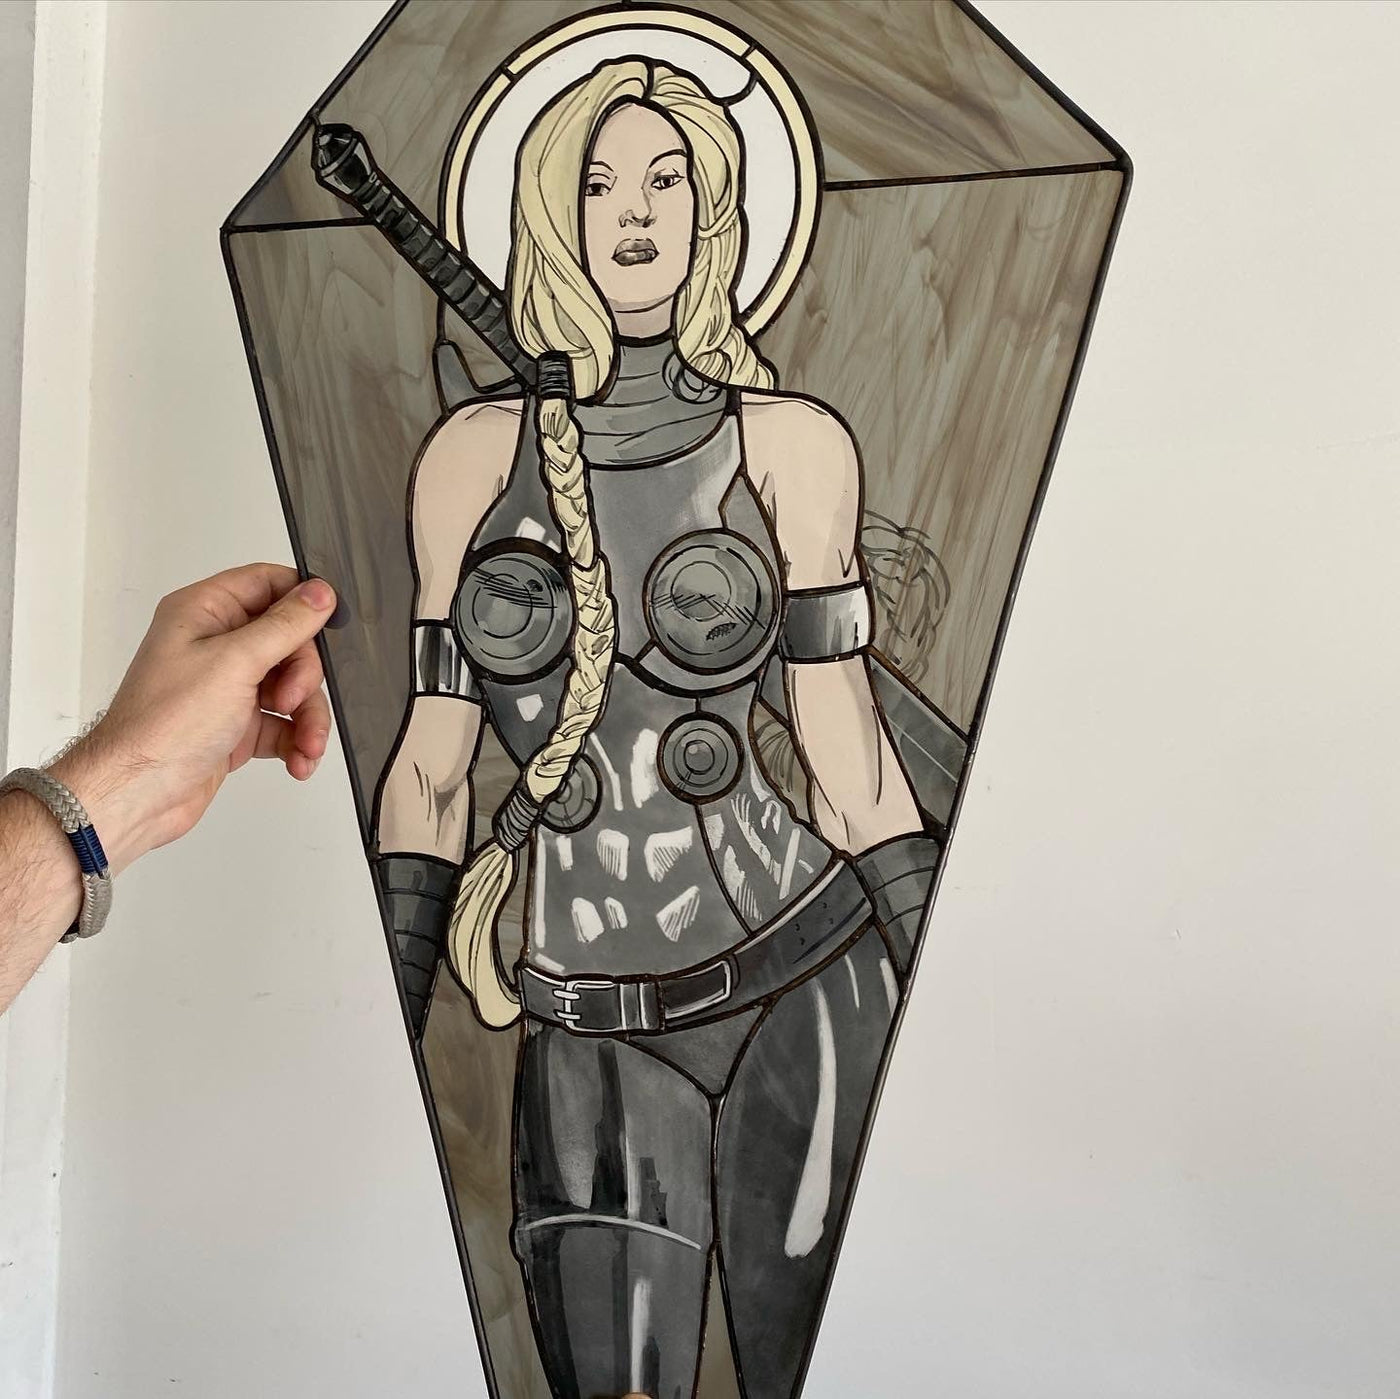 Heroes Never Die - Valkyrie Inspired Stained Glass Art